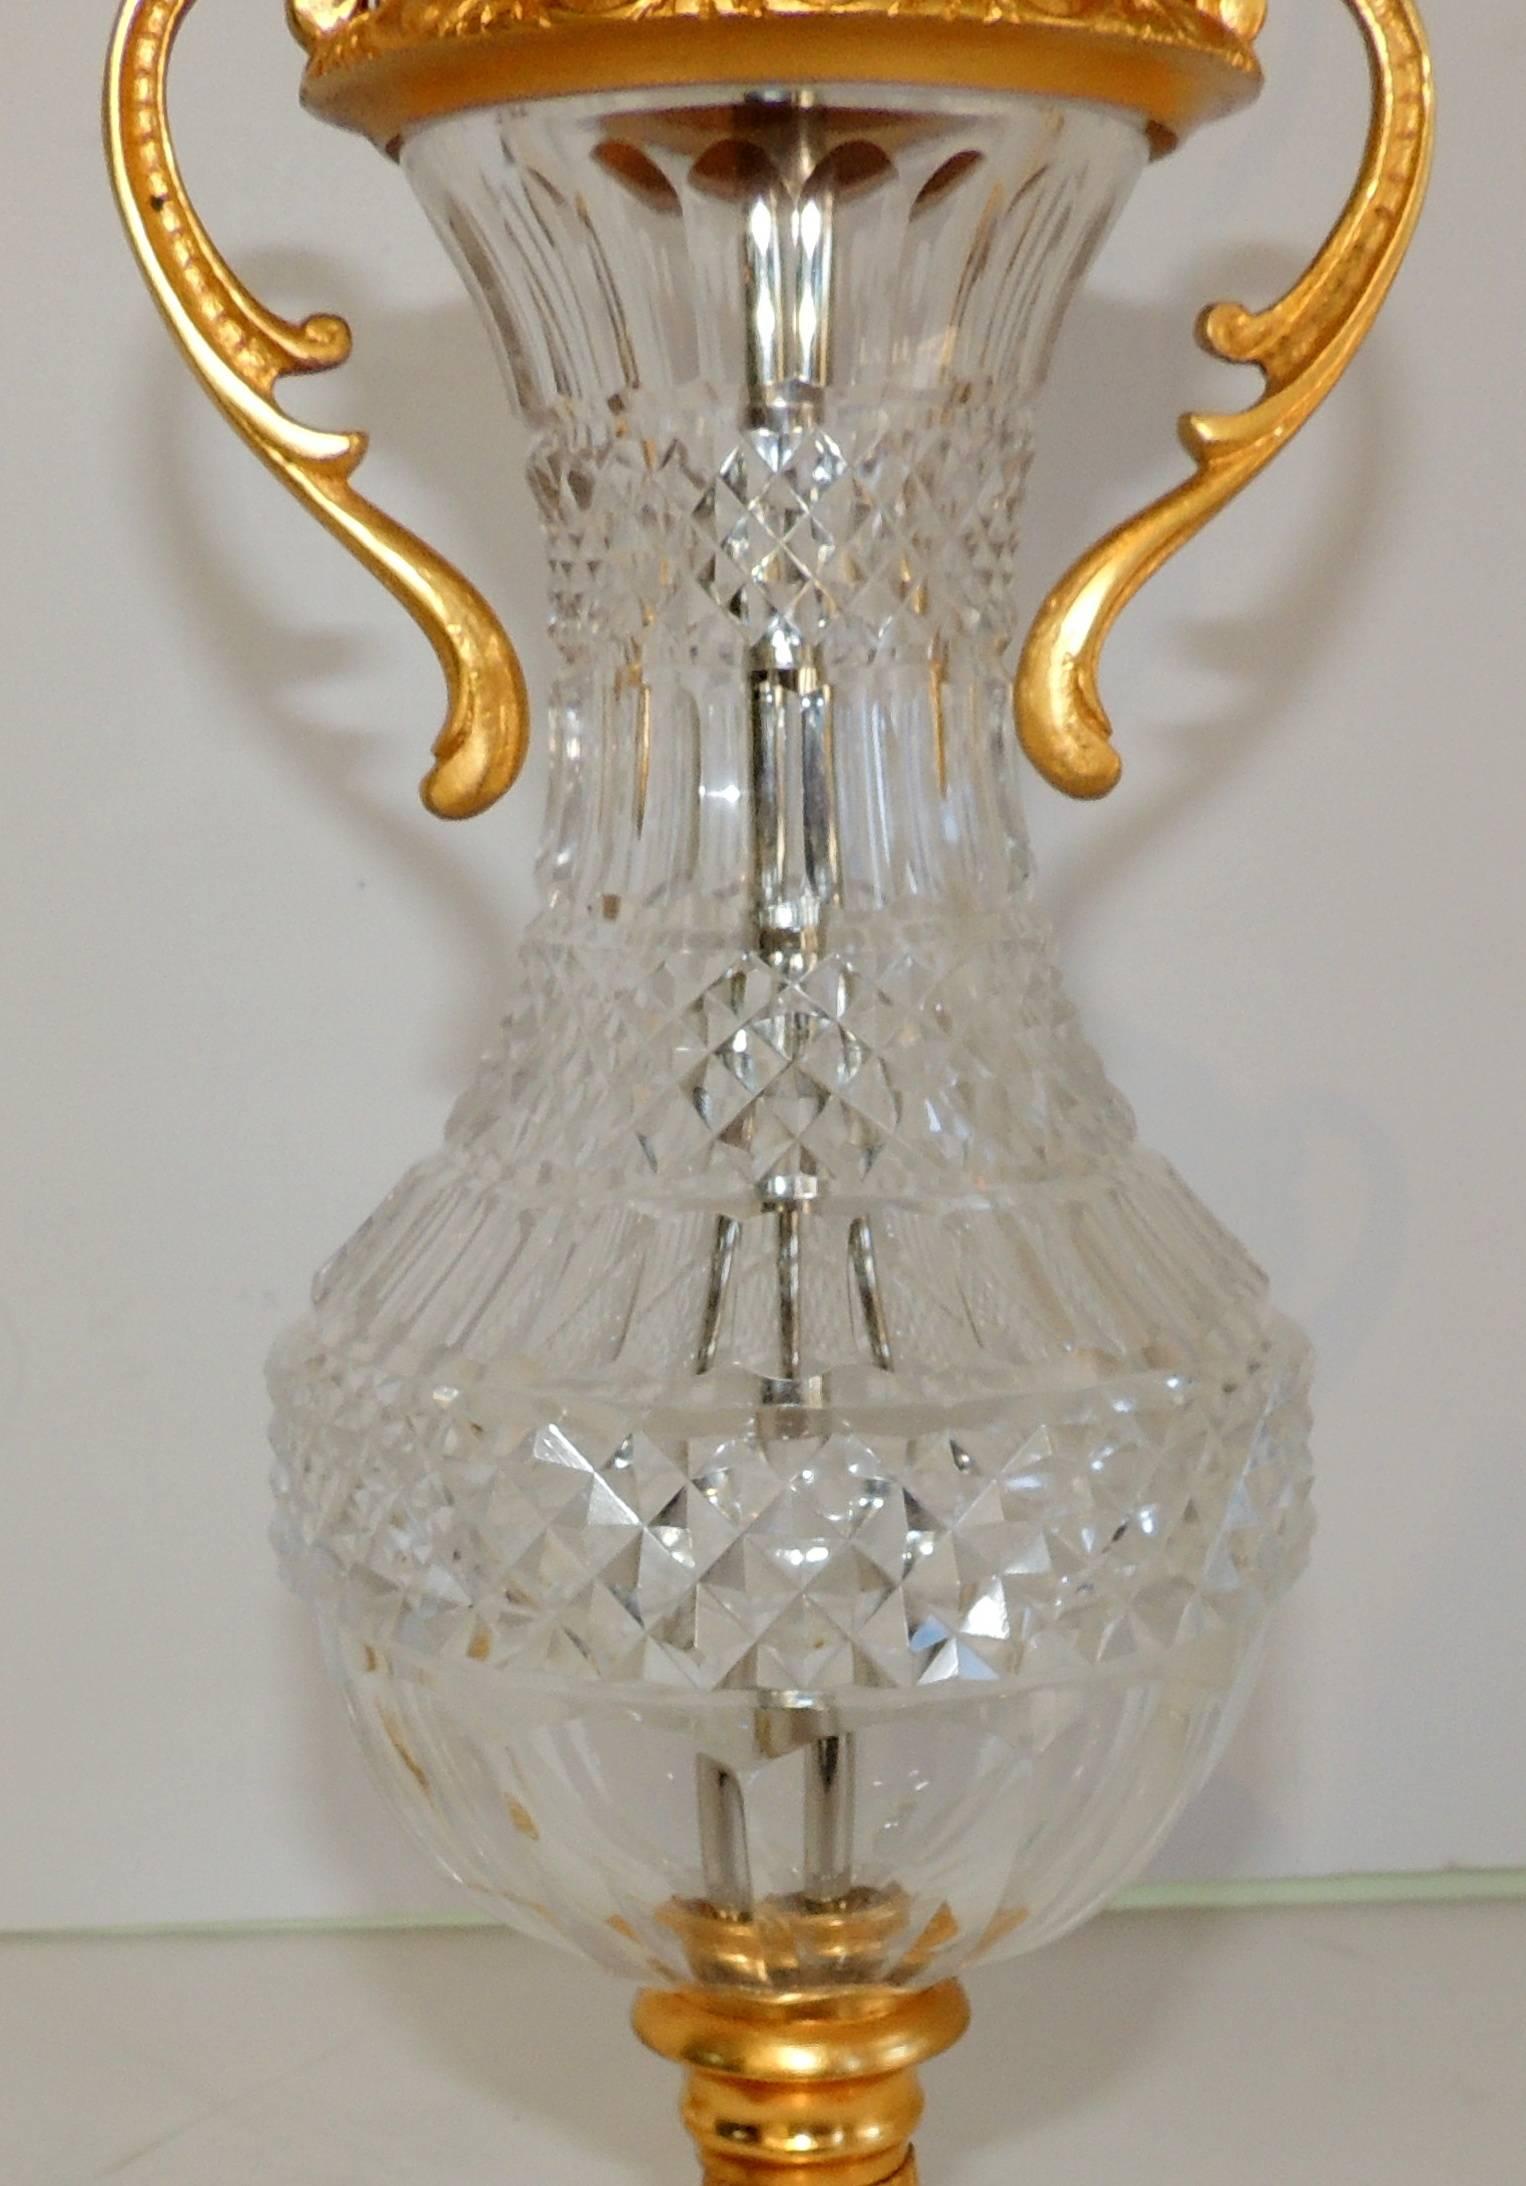 Pair of French Gilt Dore Bronze Cut Crystal Urn Form Ormolu-Mounted Lamps In Good Condition For Sale In Roslyn, NY